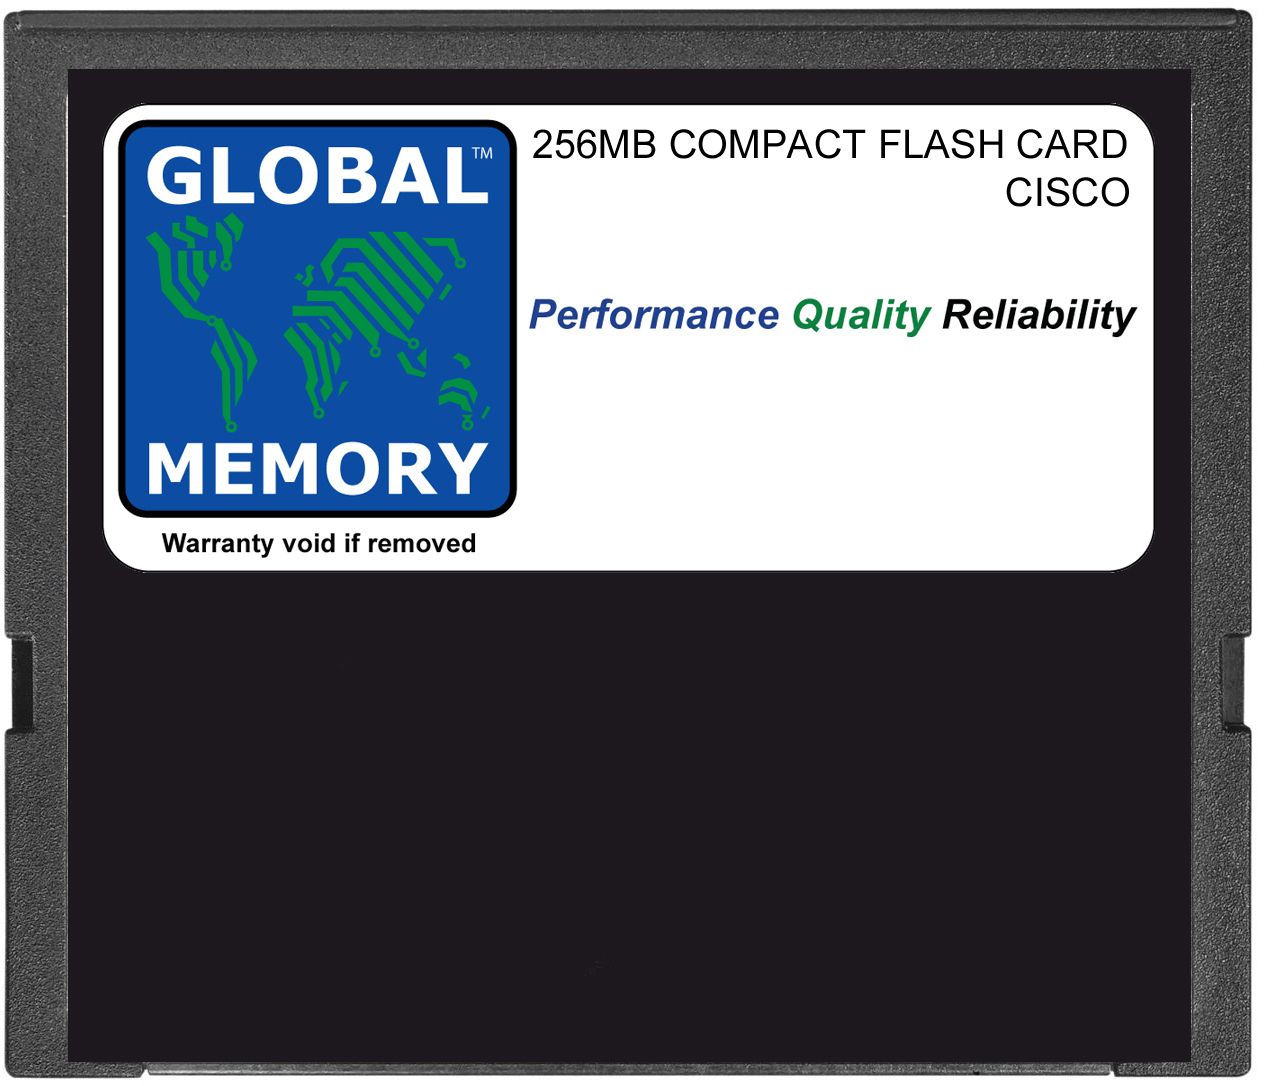 256MB COMPACT FLASH CARD MEMORY FOR CISCO 1900 / 2900 / 3900 SERIES ROUTERS (MEM-CF-256MB)